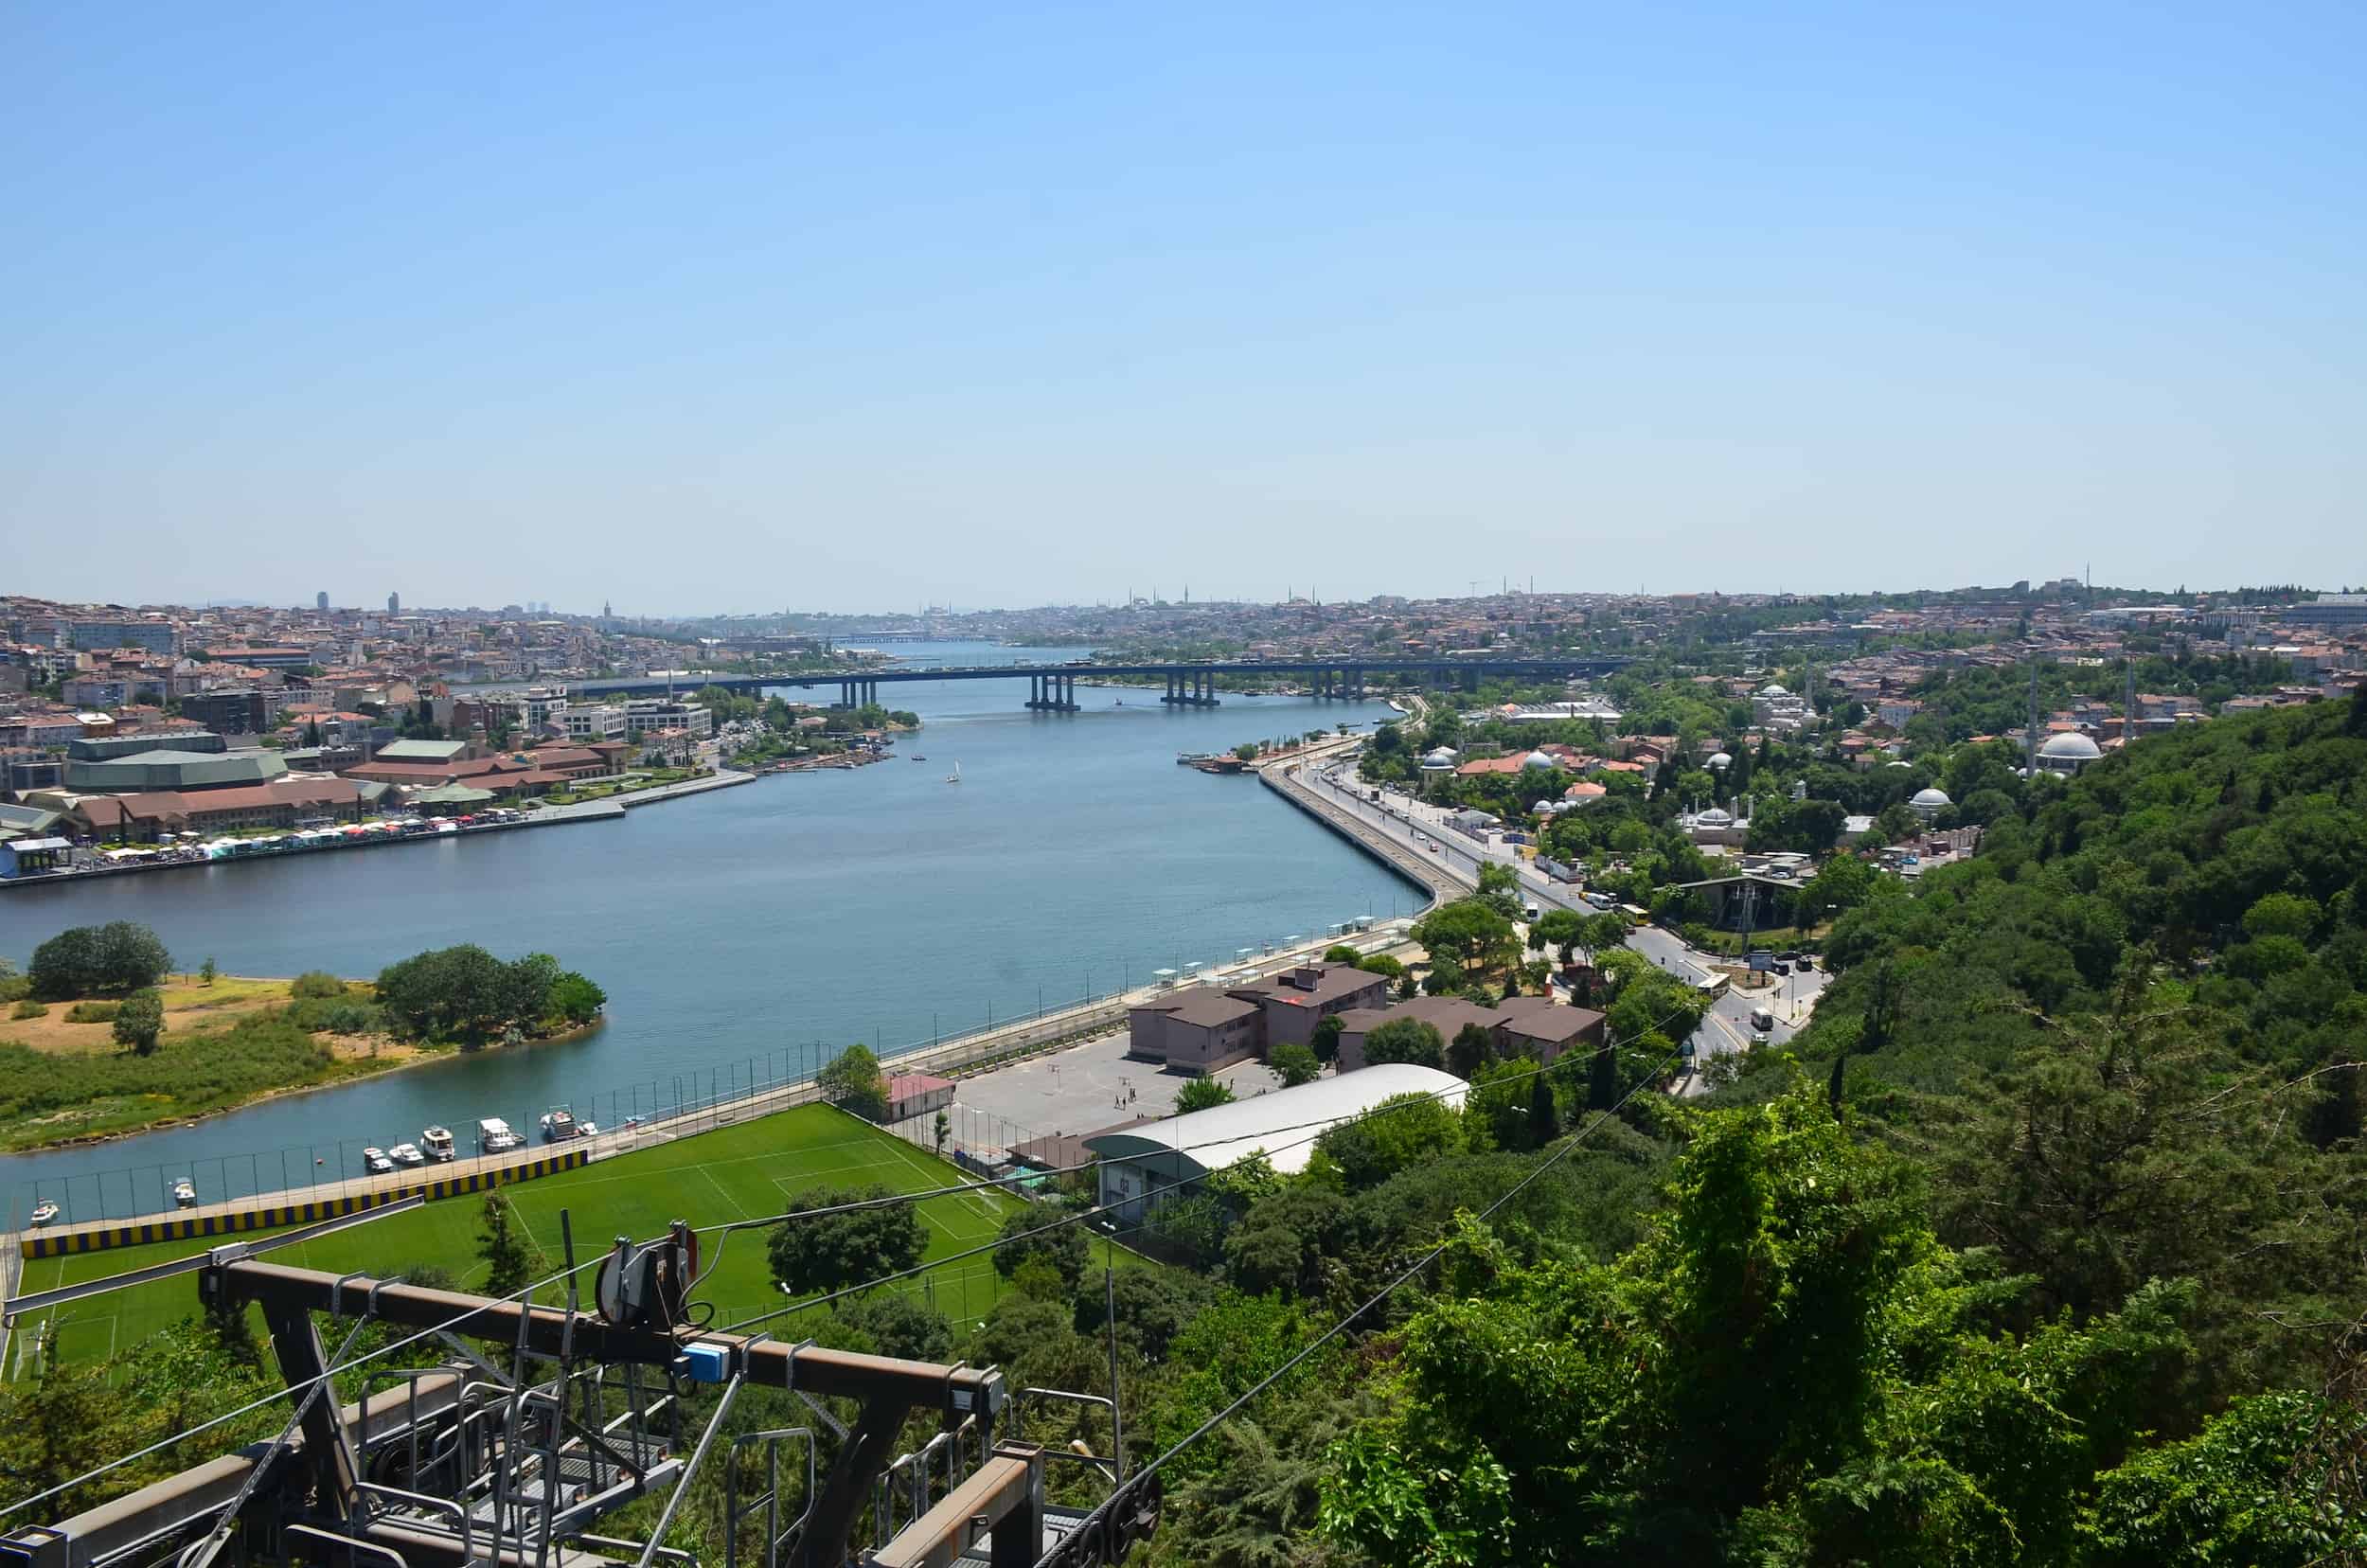 Looking towards the Bosporus at Pierre Loti Hill in Istanbul, Turkey